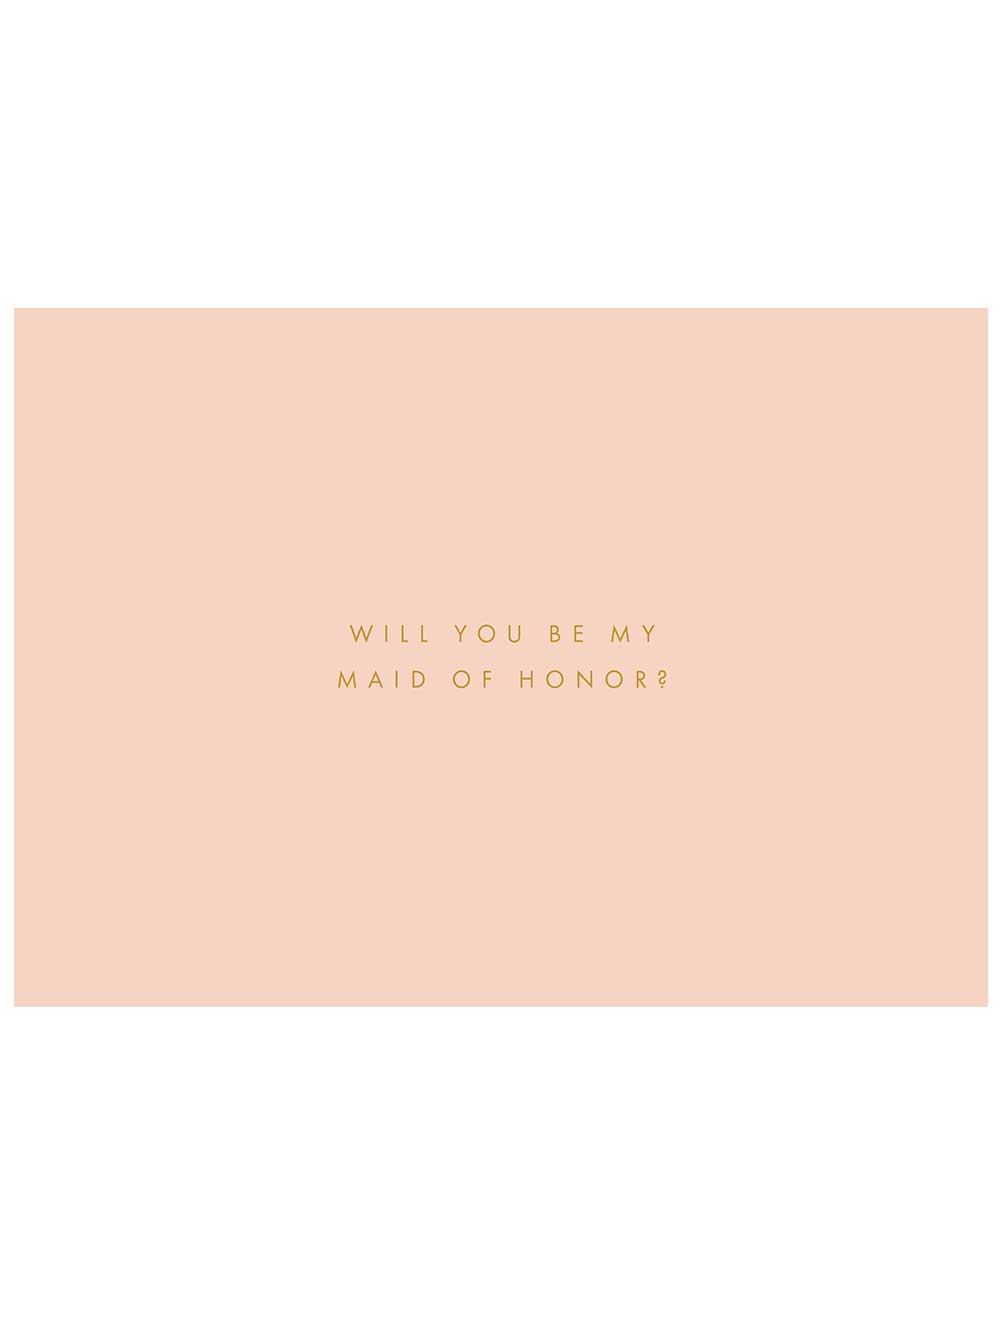 Will You Be My Maid of Honor? Notecard